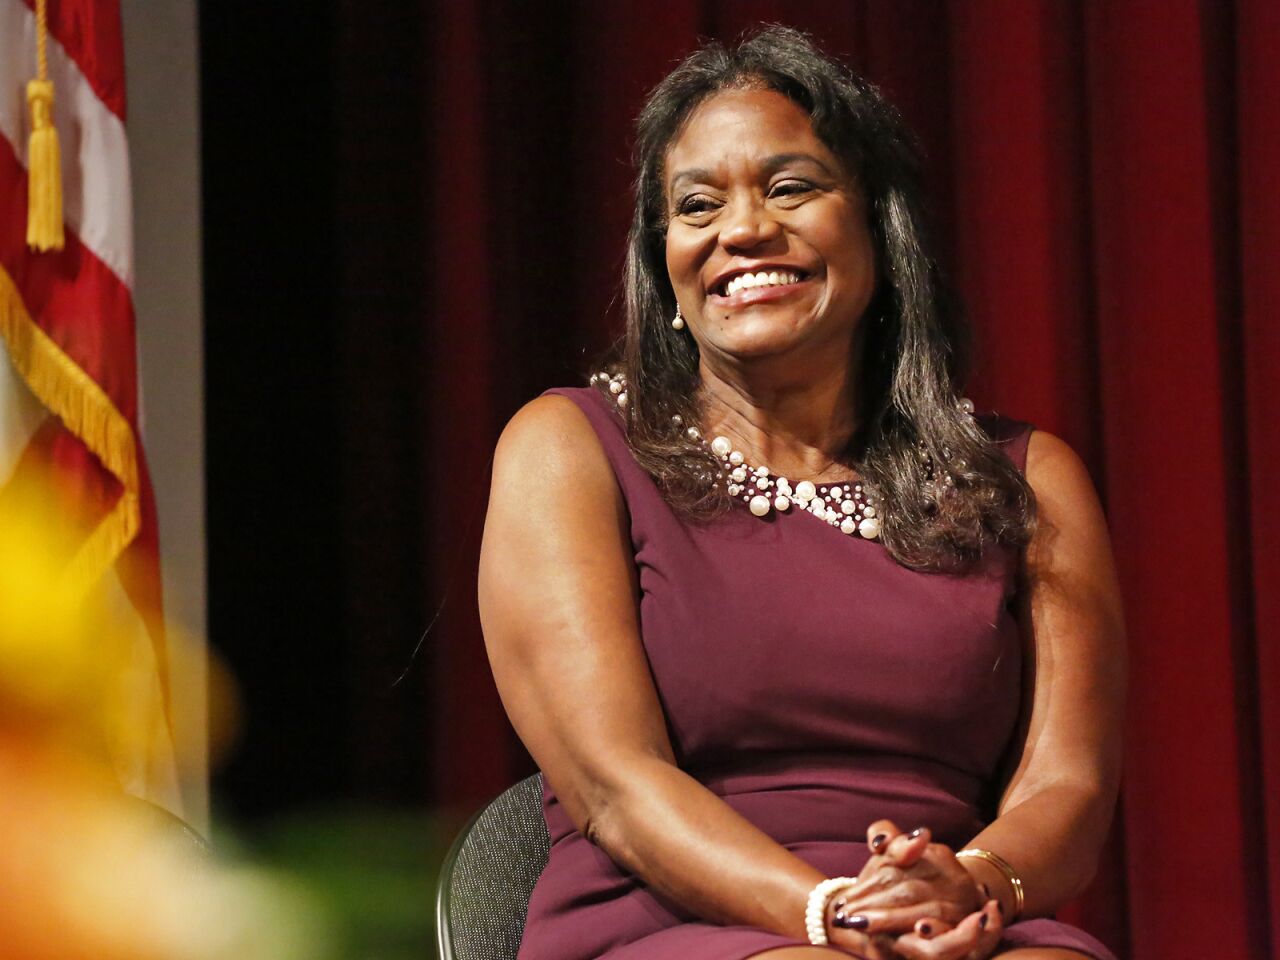 Michelle King was the first African American woman to lead Los Angeles Unified School District. Her major accomplishment was pushing the graduation rate to record levels by allowing students to quickly make up credits for failed classes. She was 57.